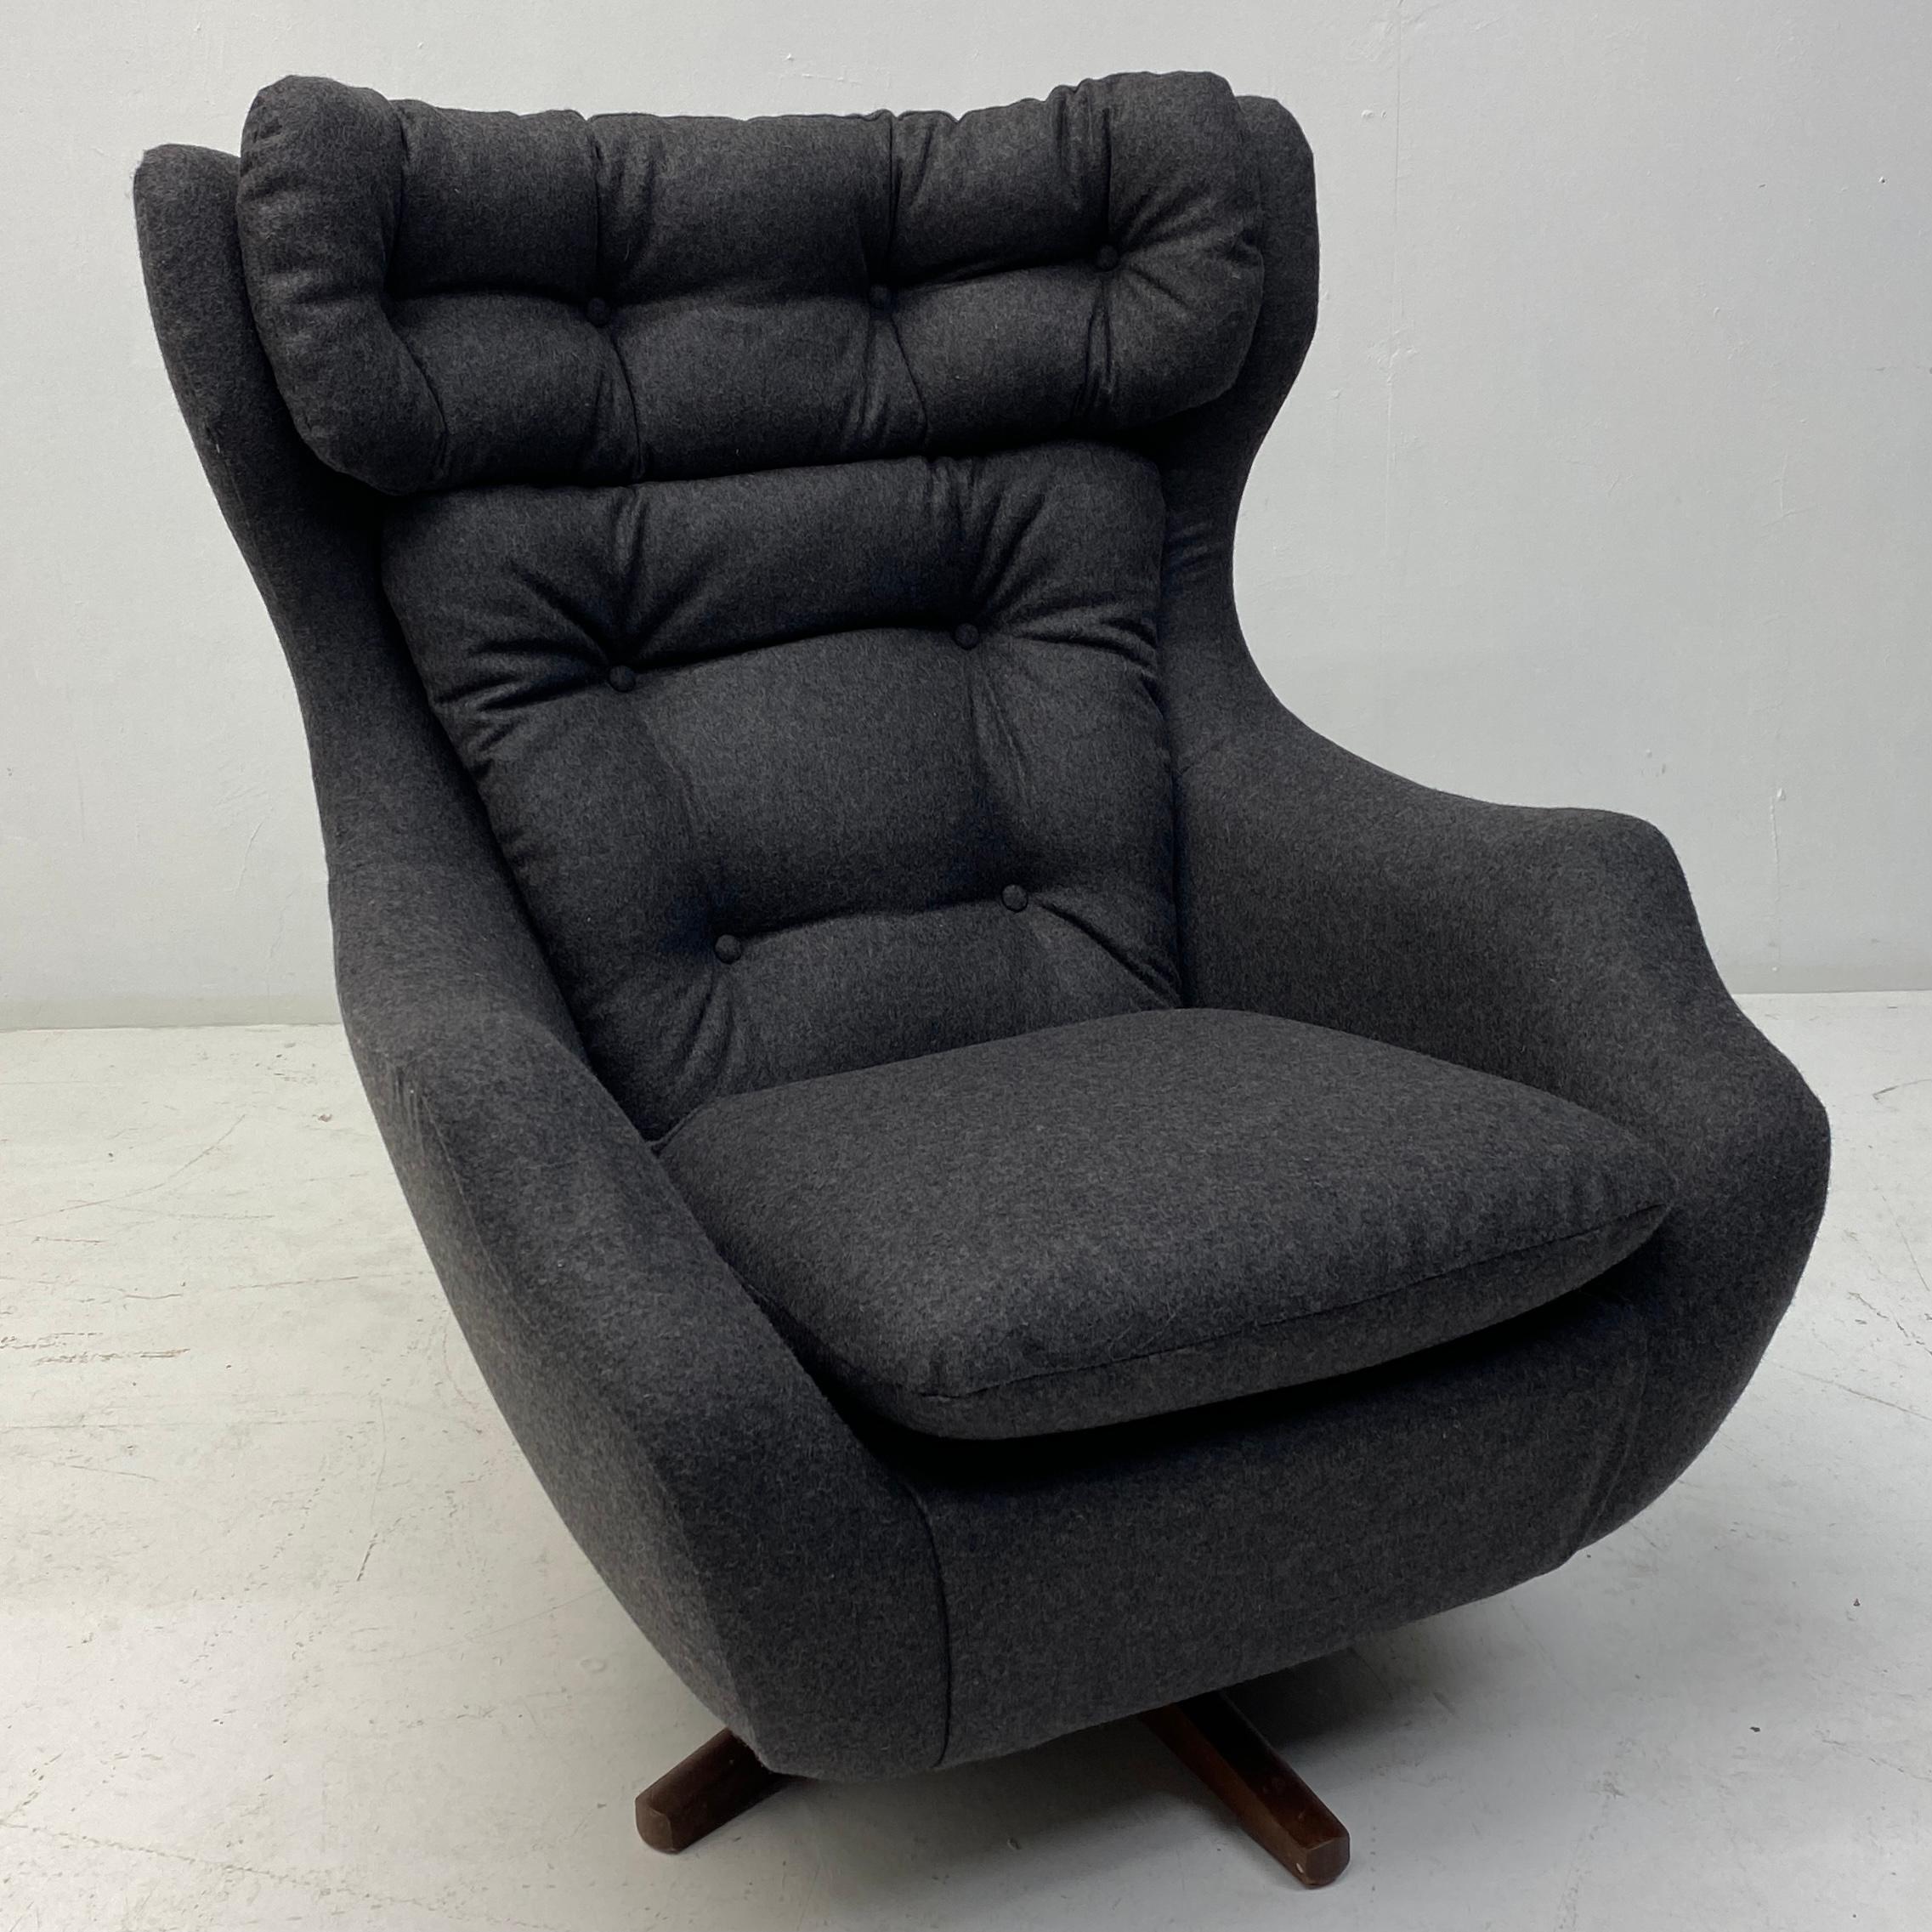 A stunning British midcentury Parker Knoll Statesman lounge chair. The lounge chair has a teak swivel base & has been completely professionally reupholstered in Taupe British Abraham Moon wool fabric. The chair has buttons to seat back & to the back